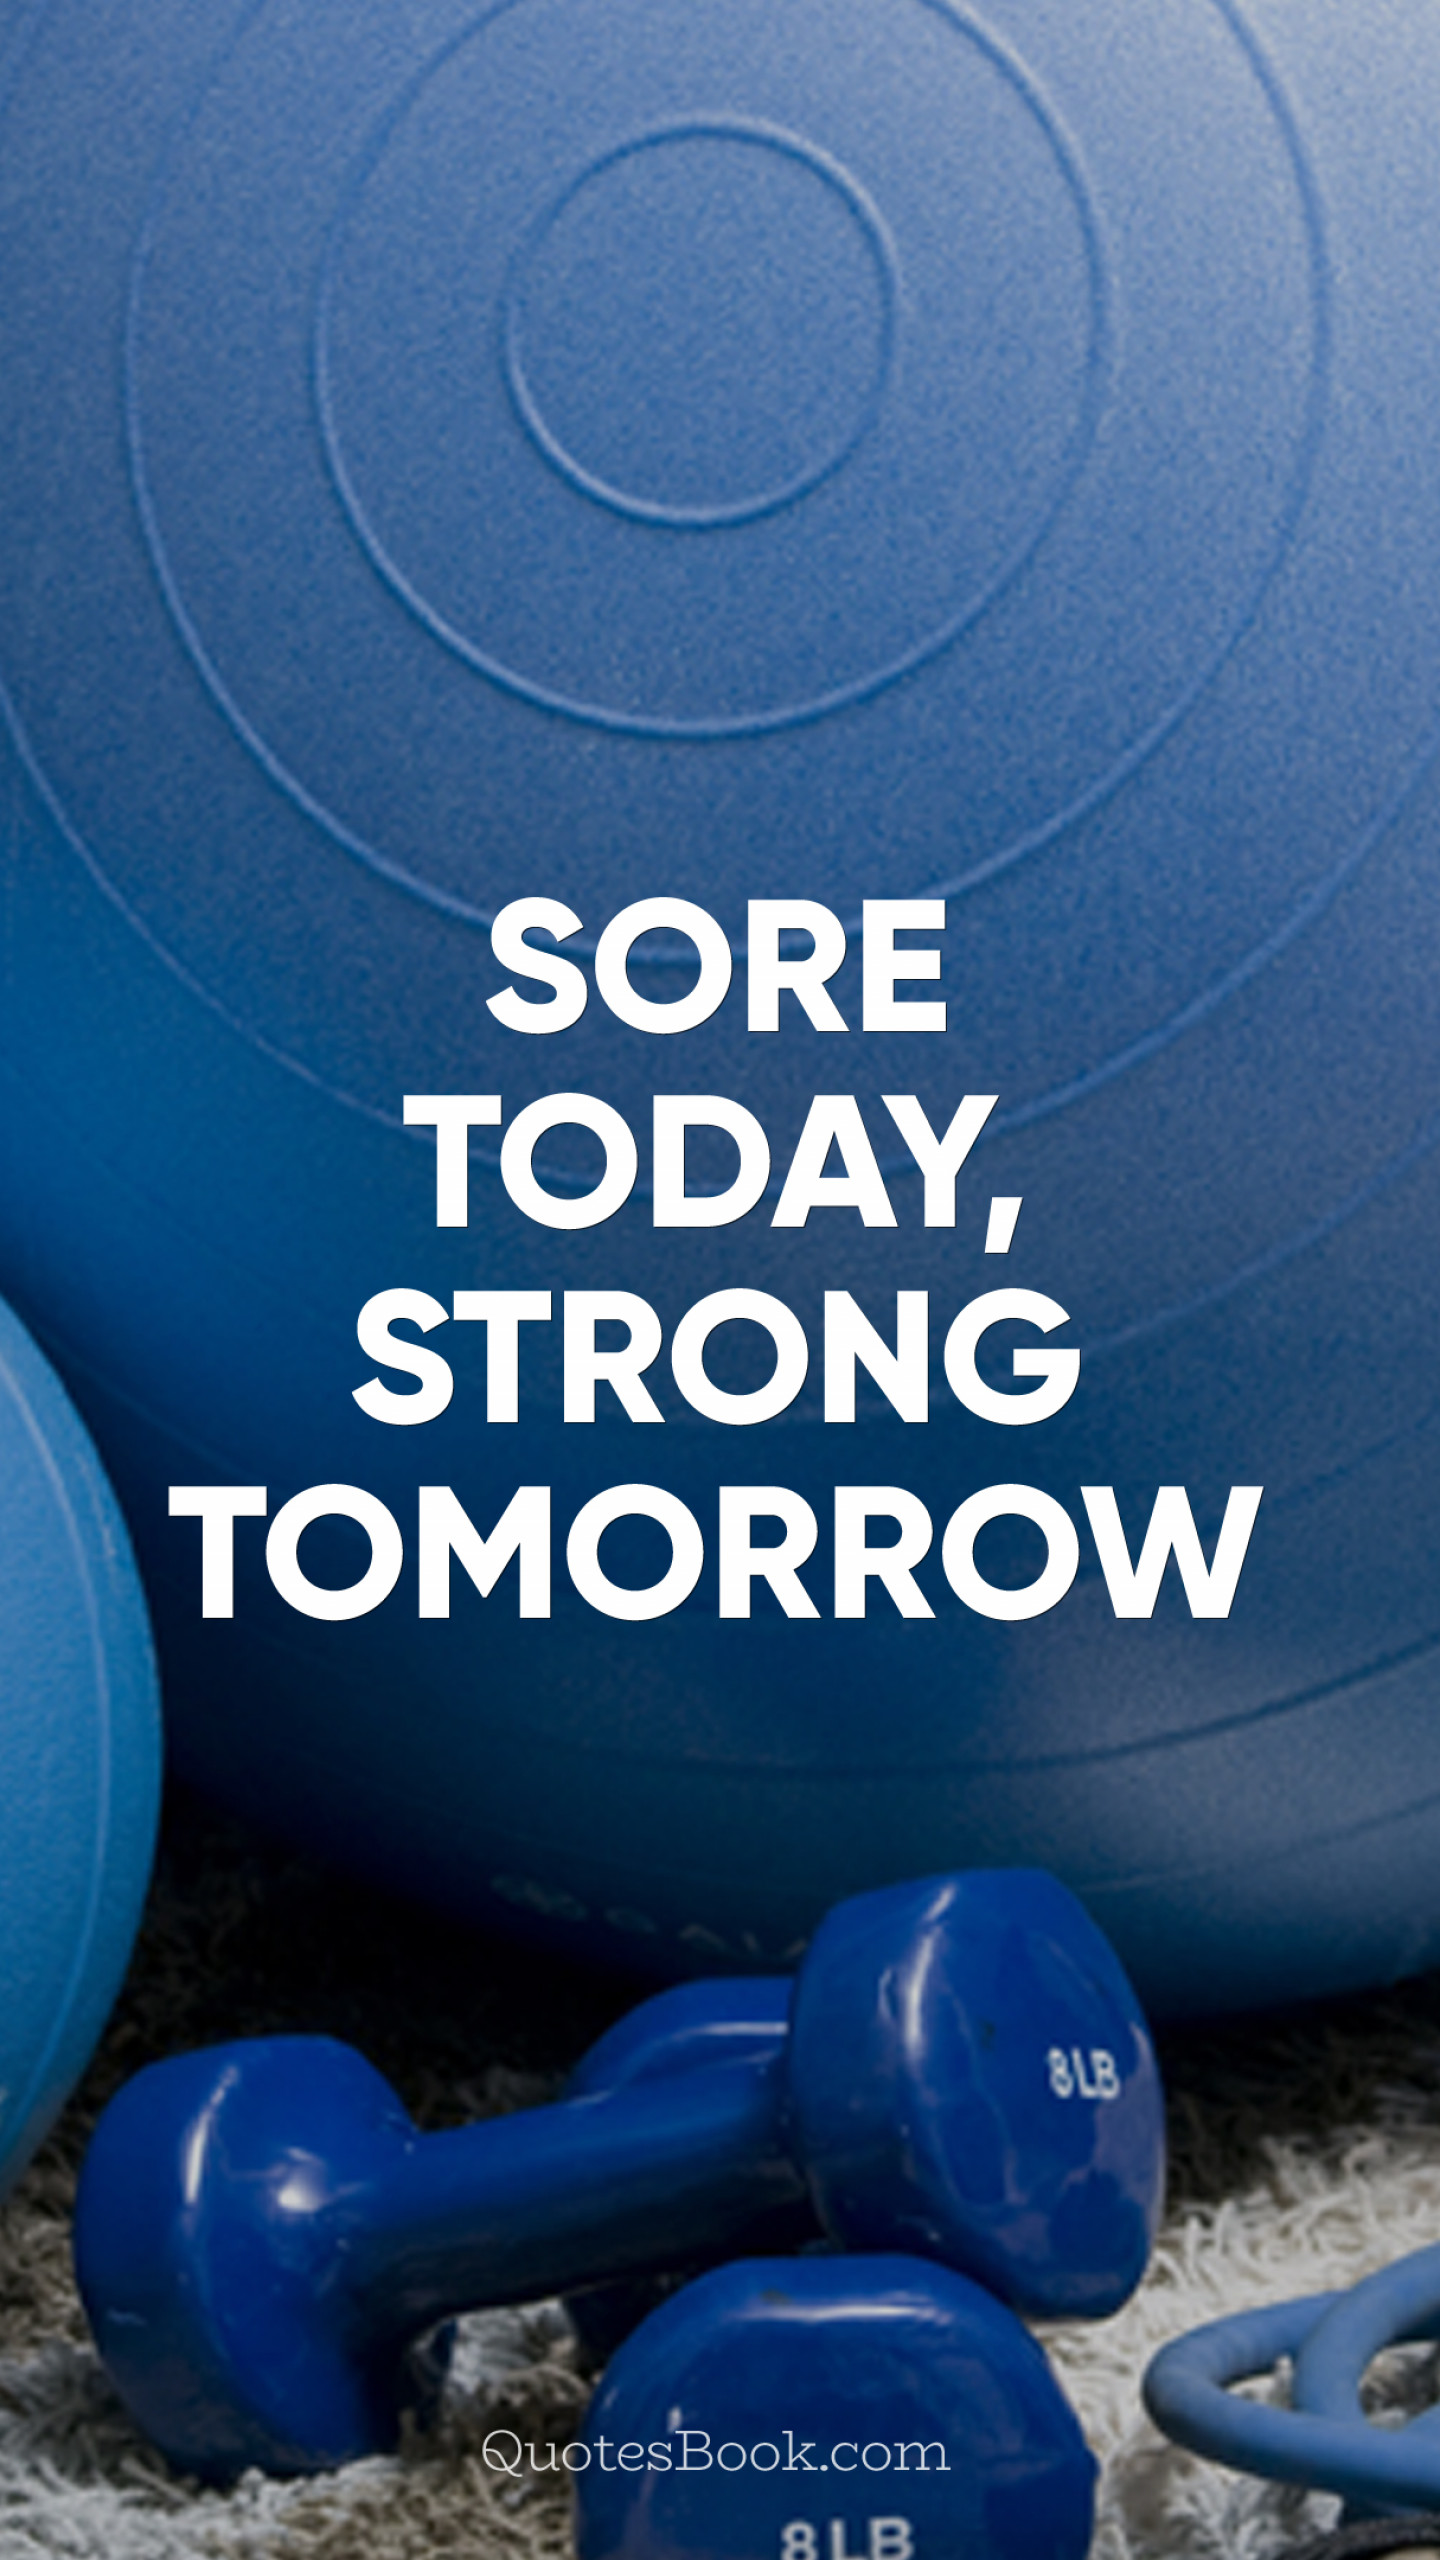 Sore Today Strong Tomorrow QuotesBook